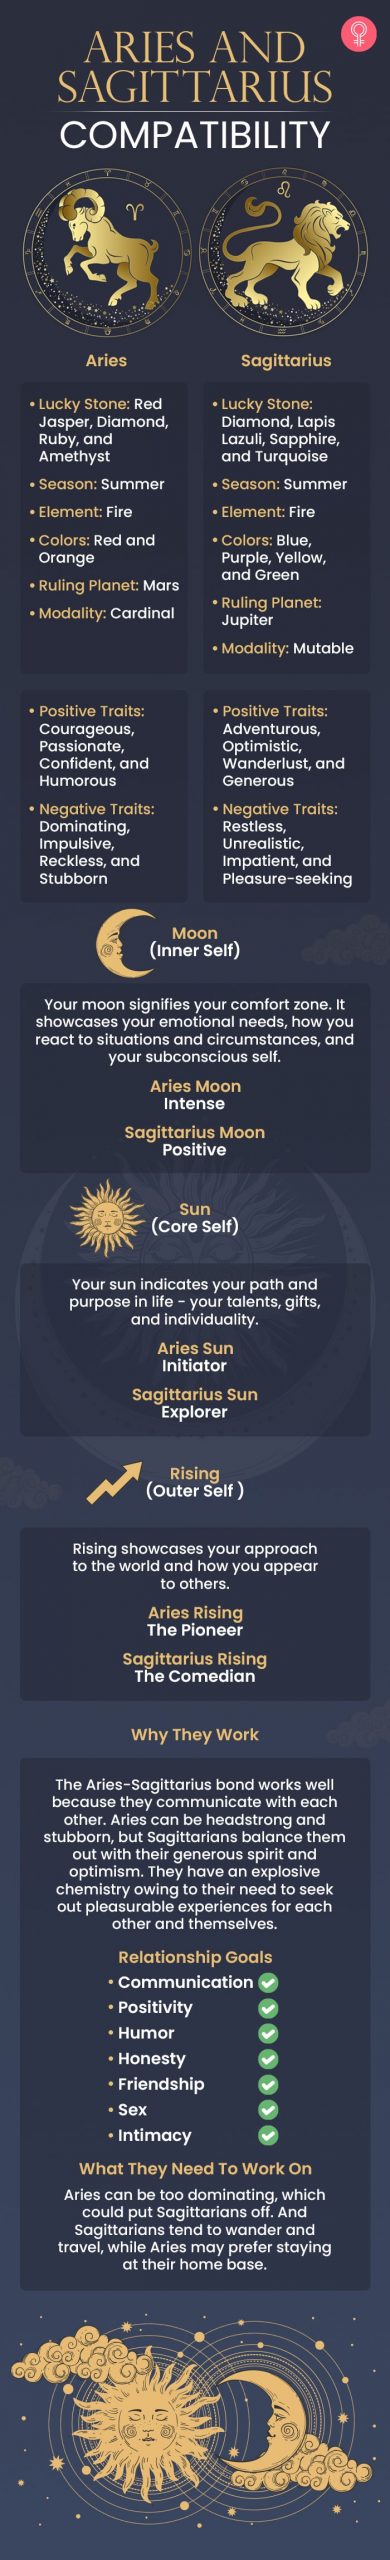 aries and sagittarius compatibility [infographic]